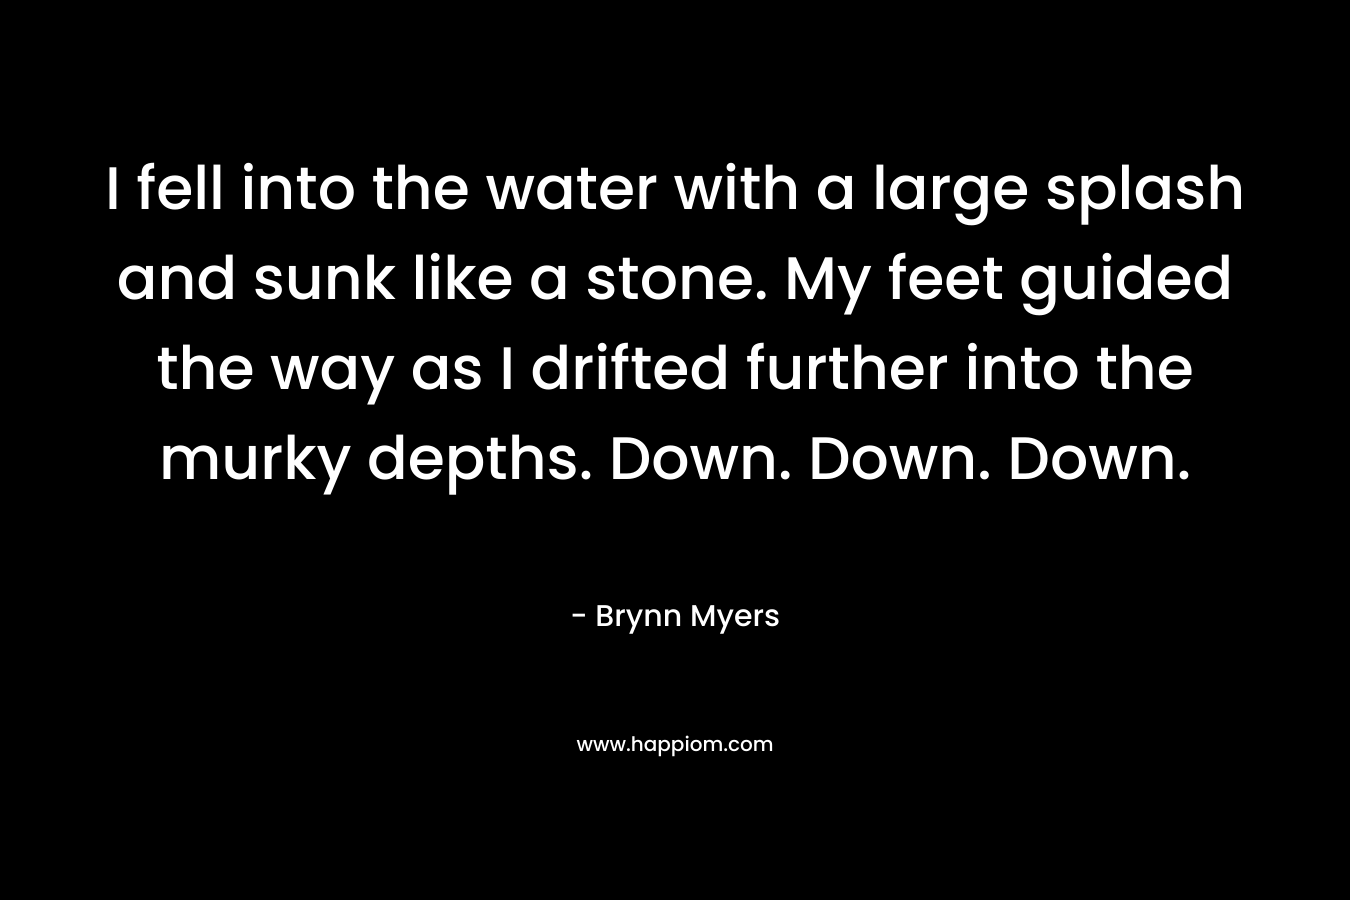 I fell into the water with a large splash and sunk like a stone. My feet guided the way as I drifted further into the murky depths. Down. Down. Down. – Brynn Myers